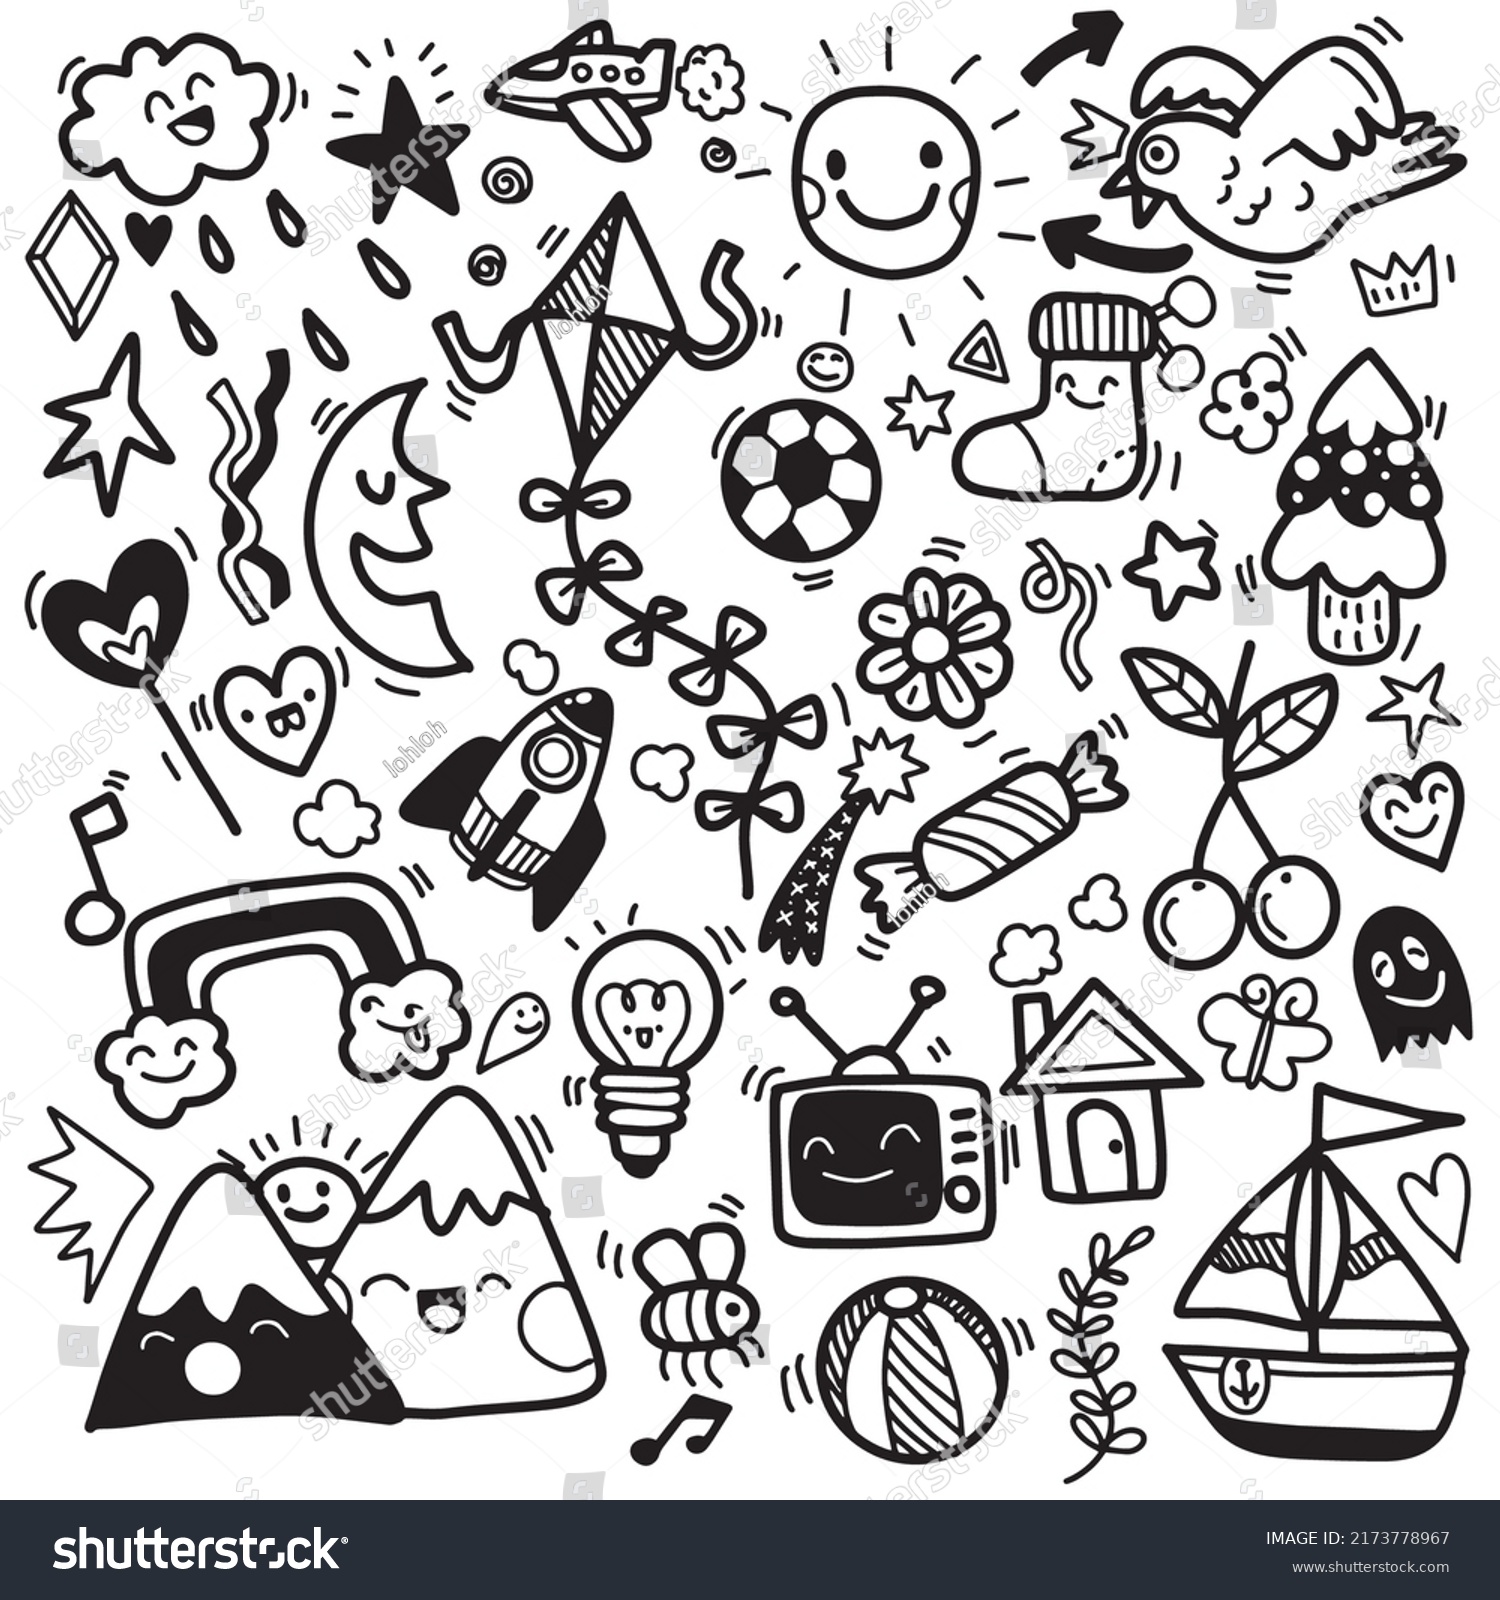 Doodle Cute Kids Vector Illustration Stock Vector (Royalty Free ...